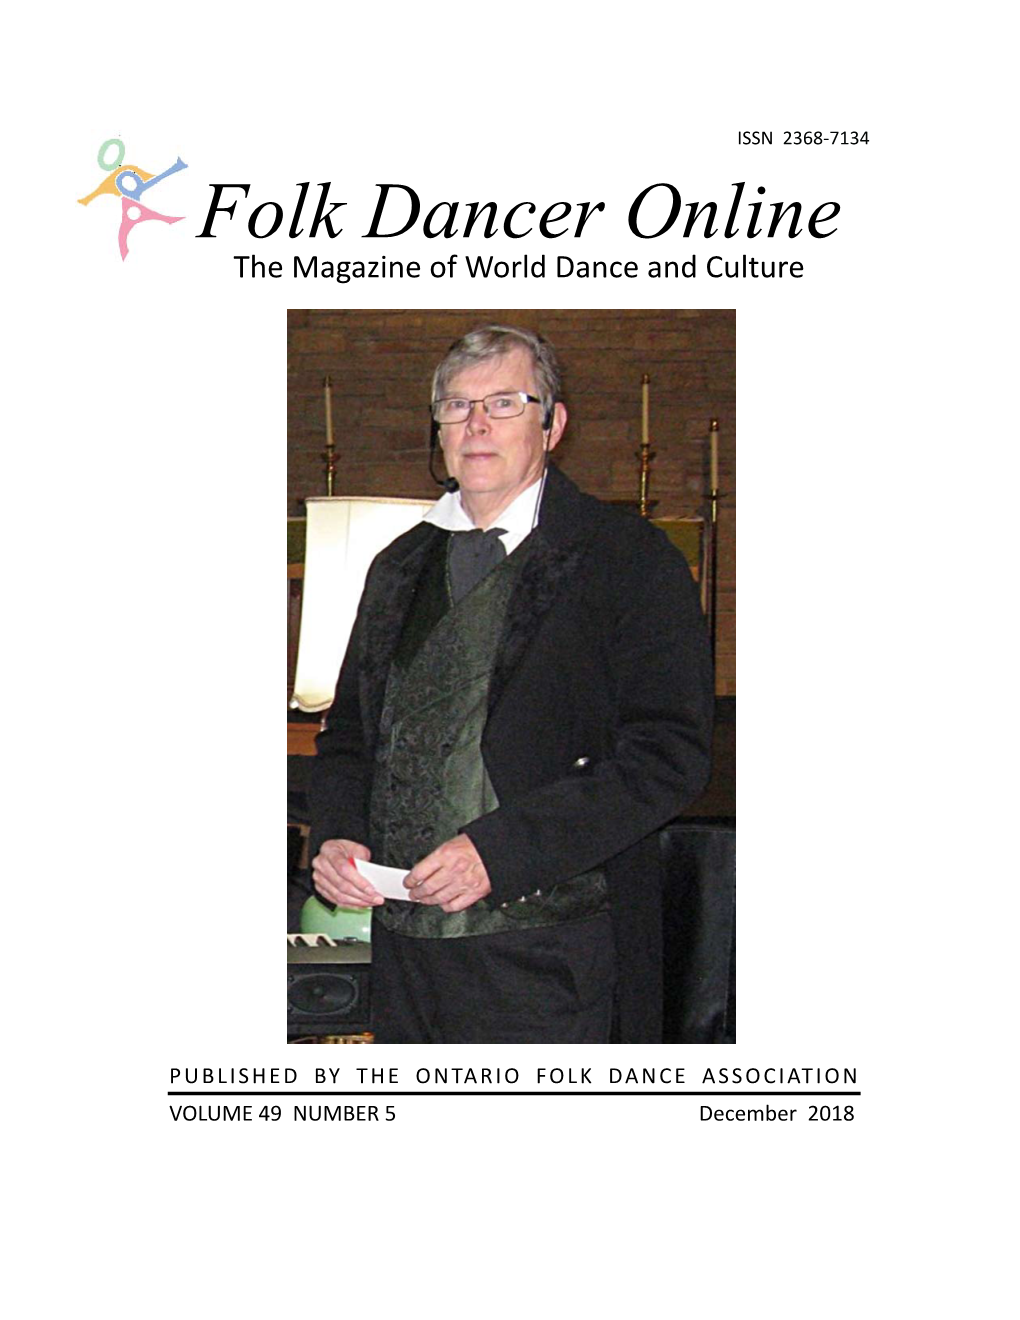 Folk Dancer Online the Magazine of World Dance and Culture